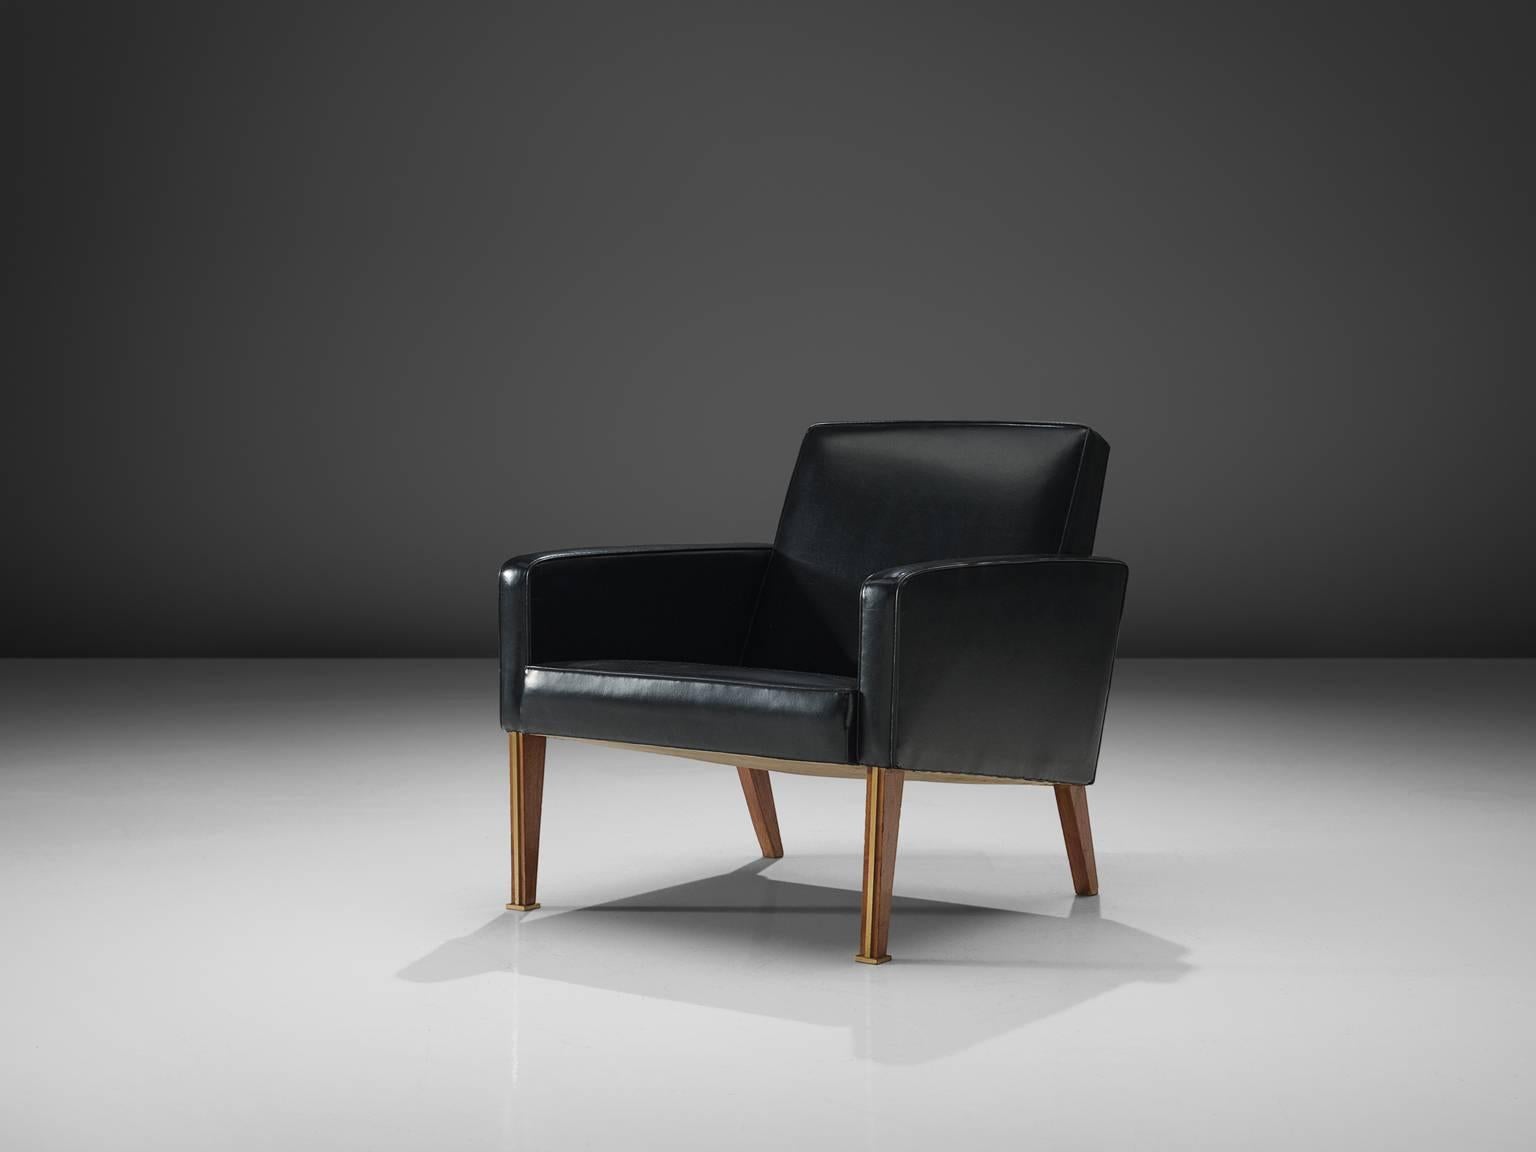 Jules Leleu, armchair, black leather, wood, France, 1950s. 

This elegant lounge chair is designed by French decorator Jules Leleu. The item holds simplistic design, with stunning details. The chair is cubist with it's straight lines and angles. The